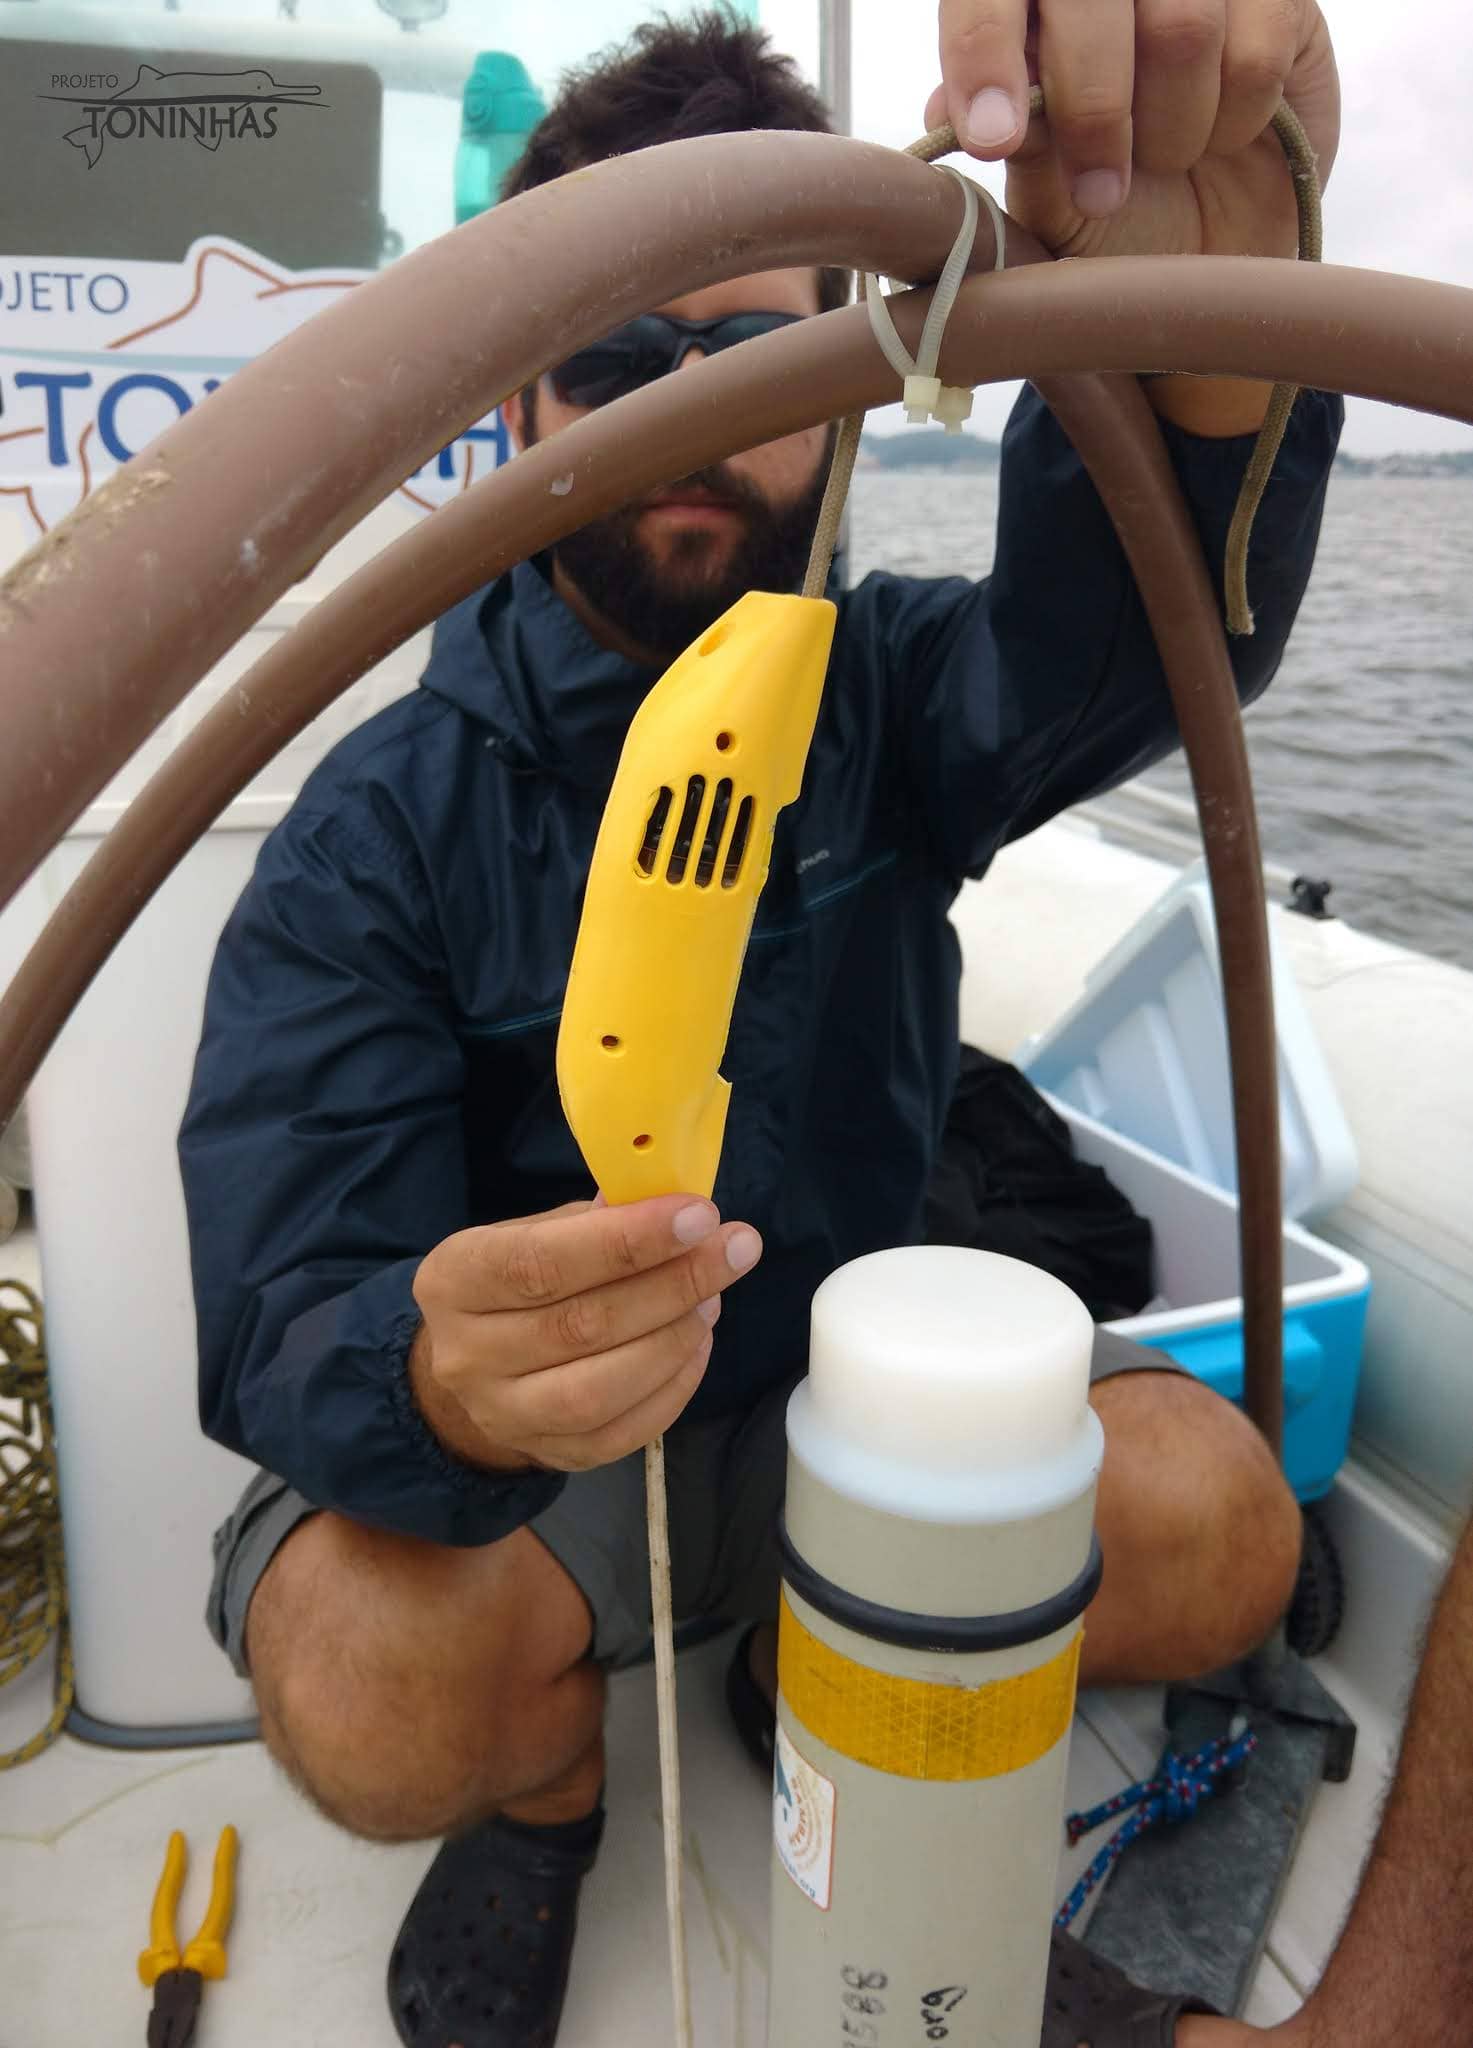 Porpoise researcher installing an acoustic alarm for porpoises in a research module.